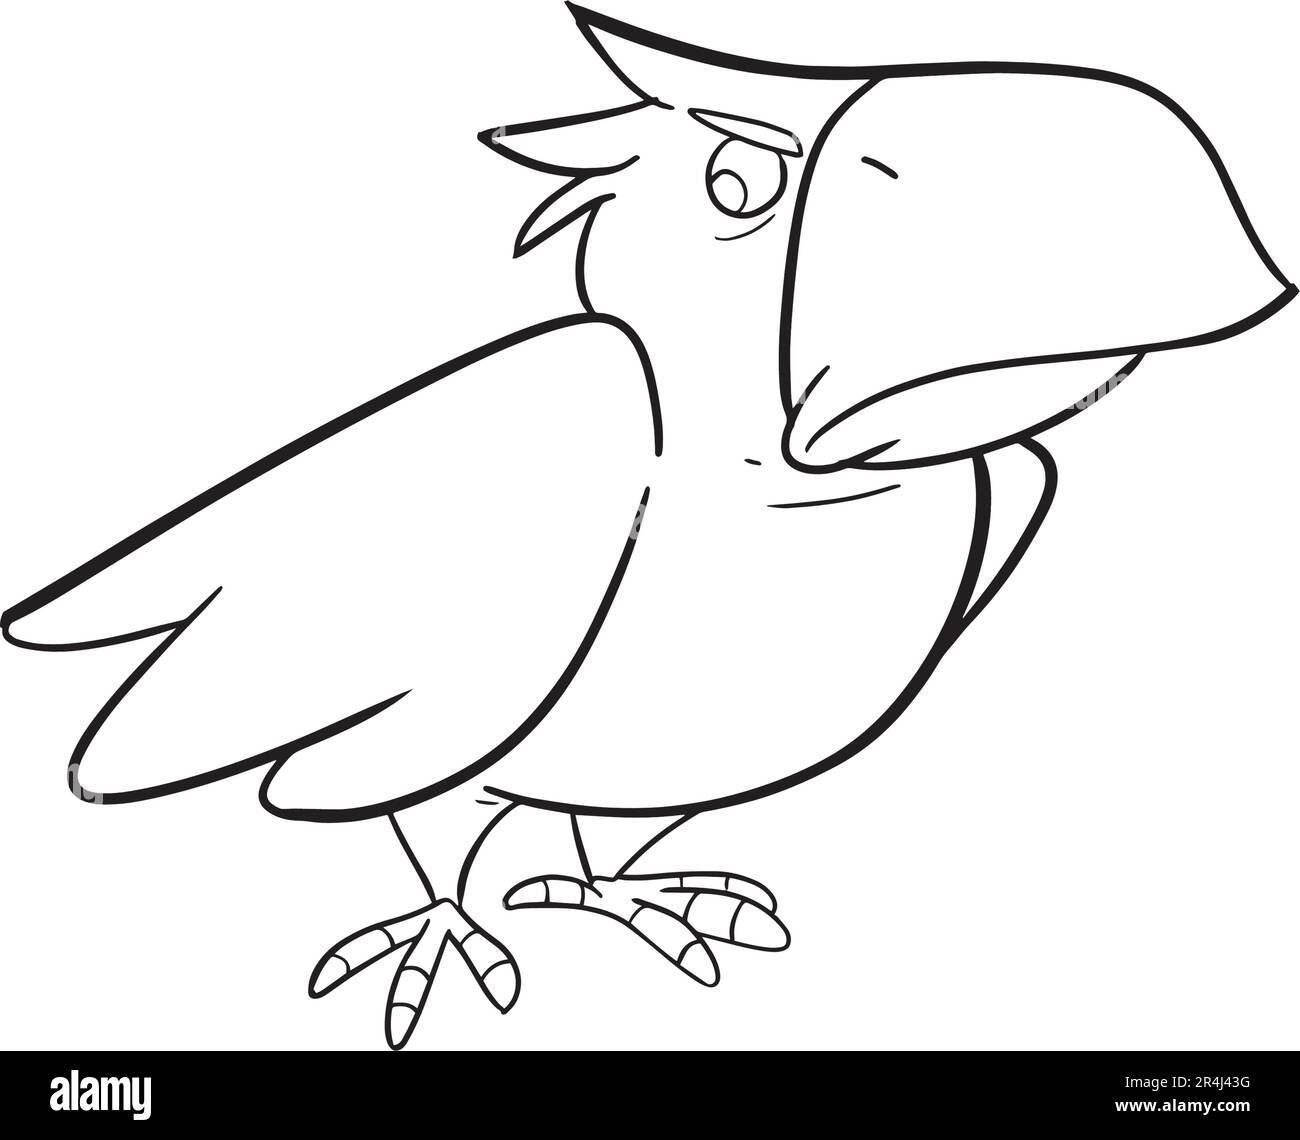 wicked crow for hallowen party coloring pages. Halloween coloring page with spooky objects, hand drawn cute Halloween coloring sheet. Doodle style. Stock Vector